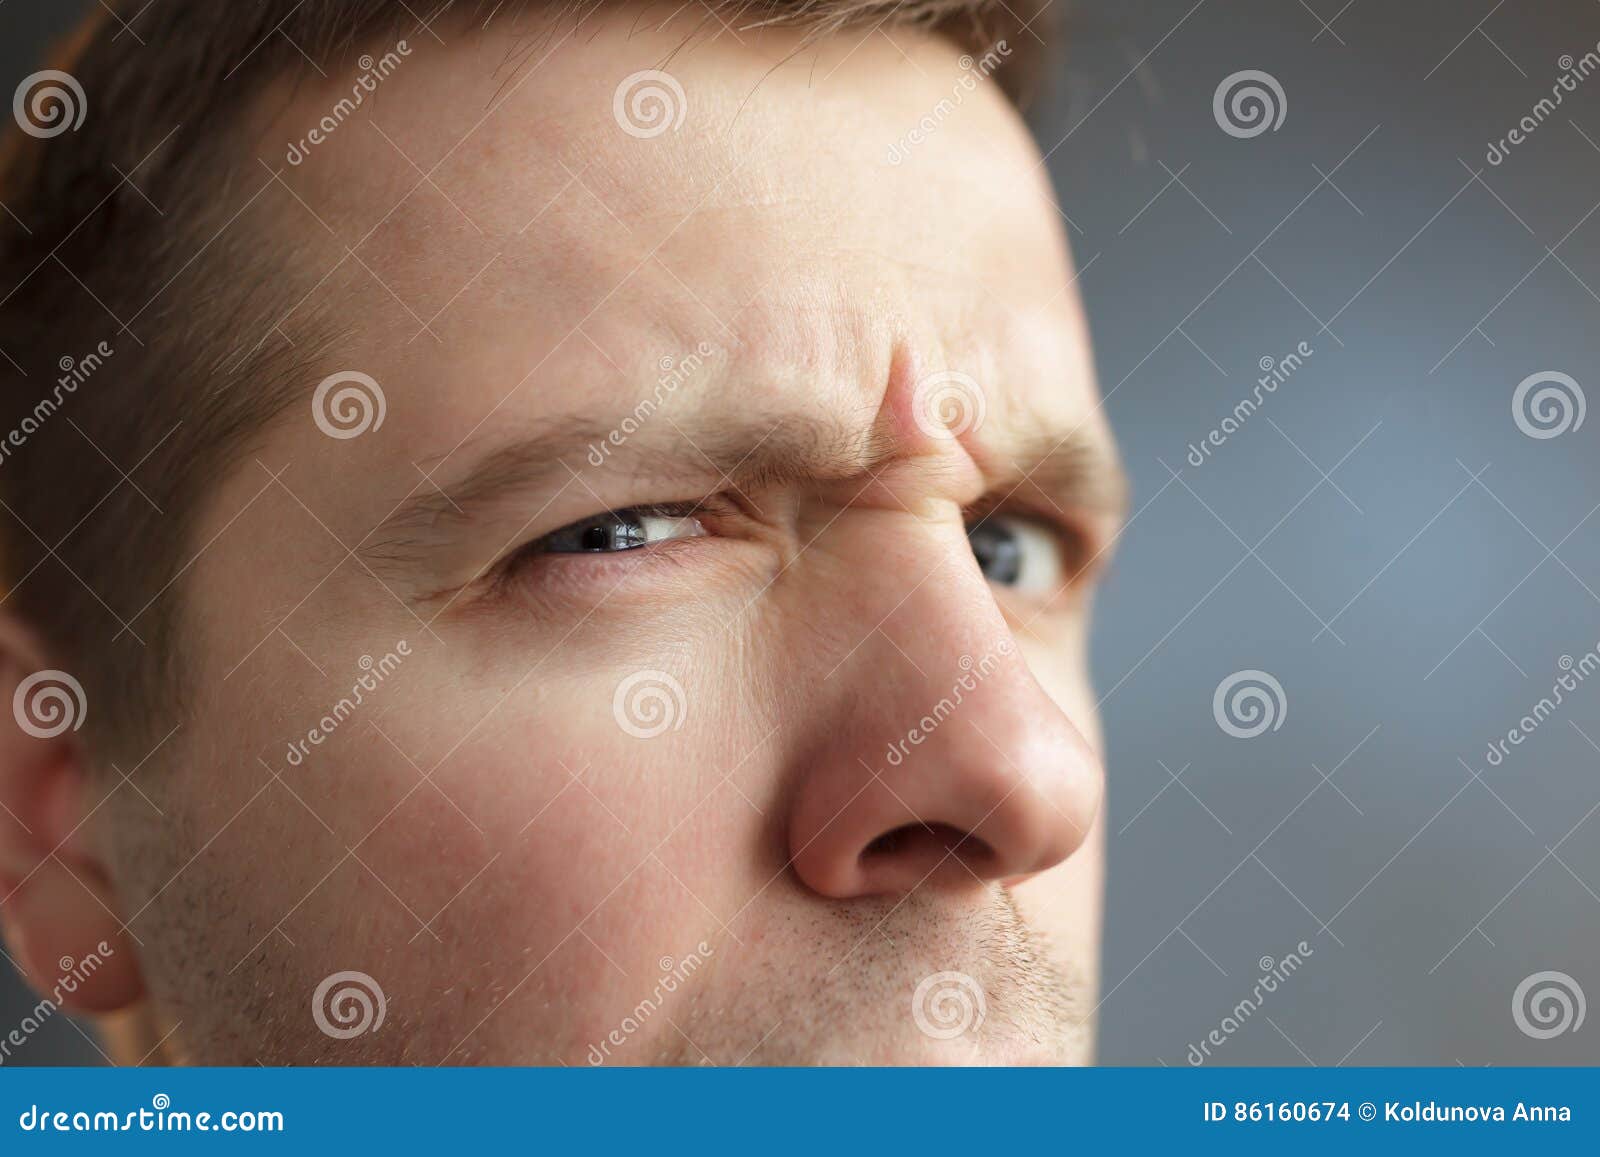 Angry man frowns his face stock photo. Image of beautiful - 86160674